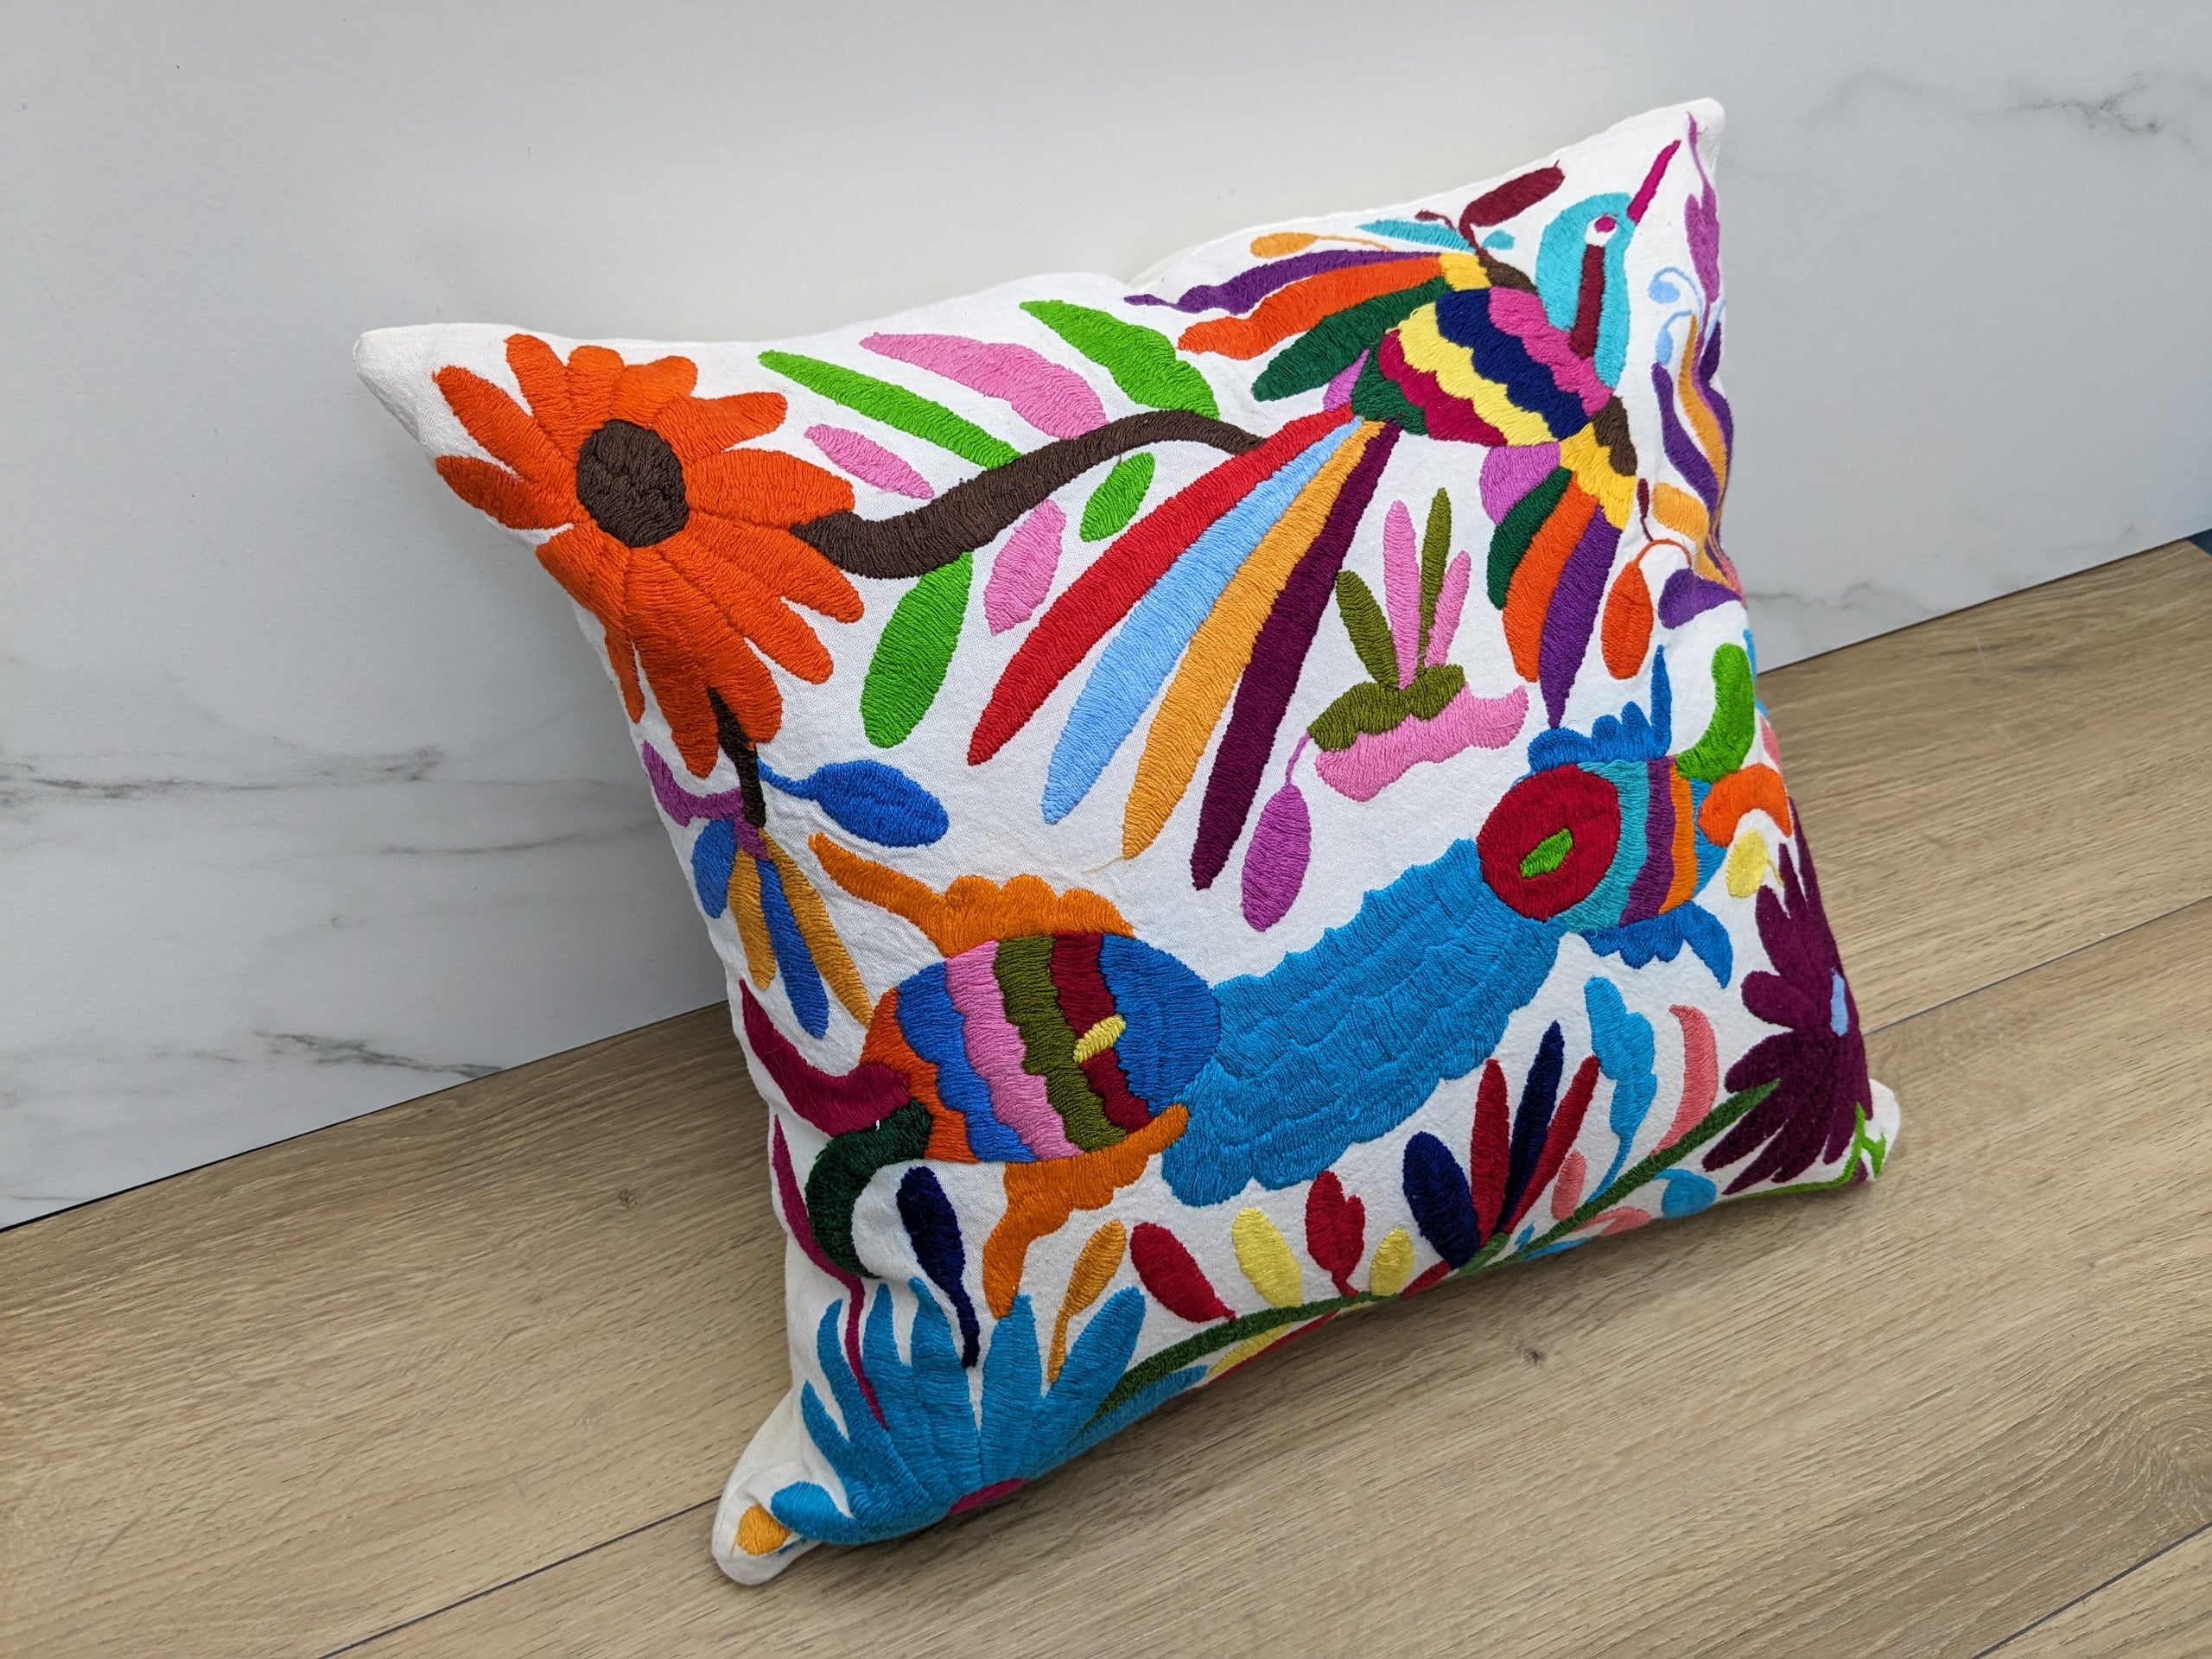 Multicolor Mexican Embroidered Throw Pillow Cover with Birds, Flowers, Animals, and Fish. Handmade in Mexico. We package and ship from the USA. Buy now at www.felipeandgrace.com.